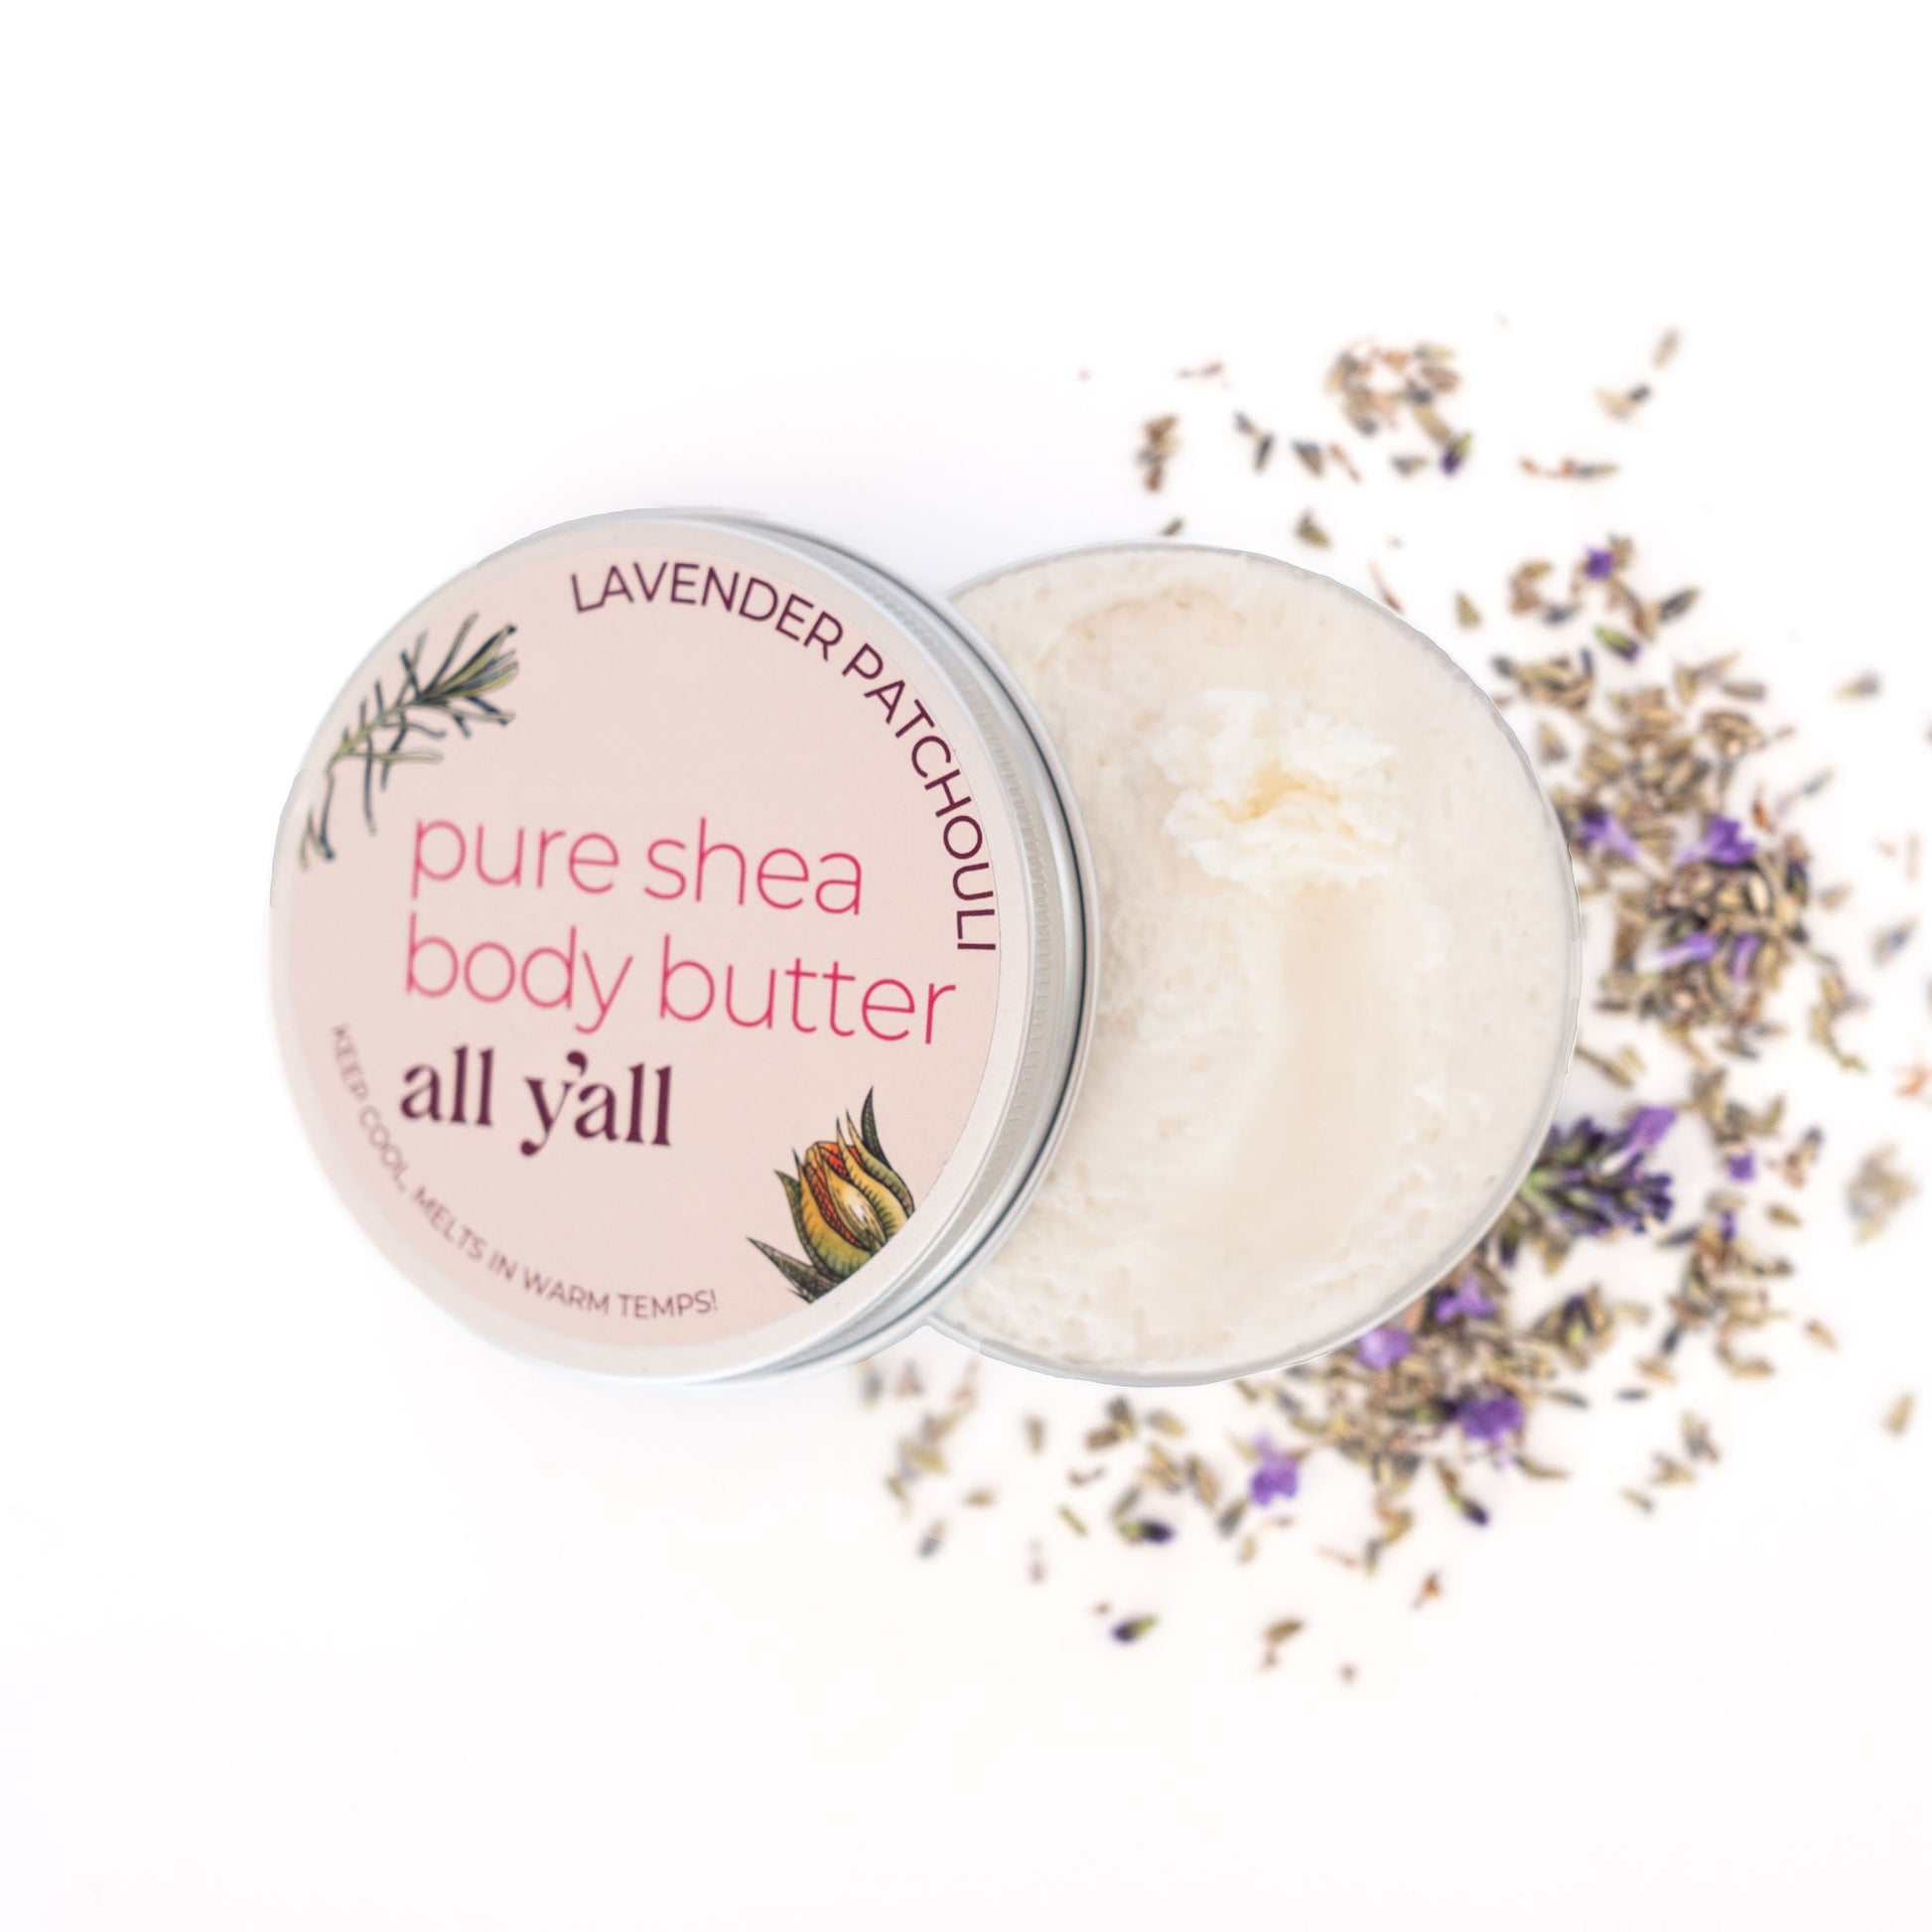 Decadent body butter is a feast for dry, parched skin | All Y'all Skincare